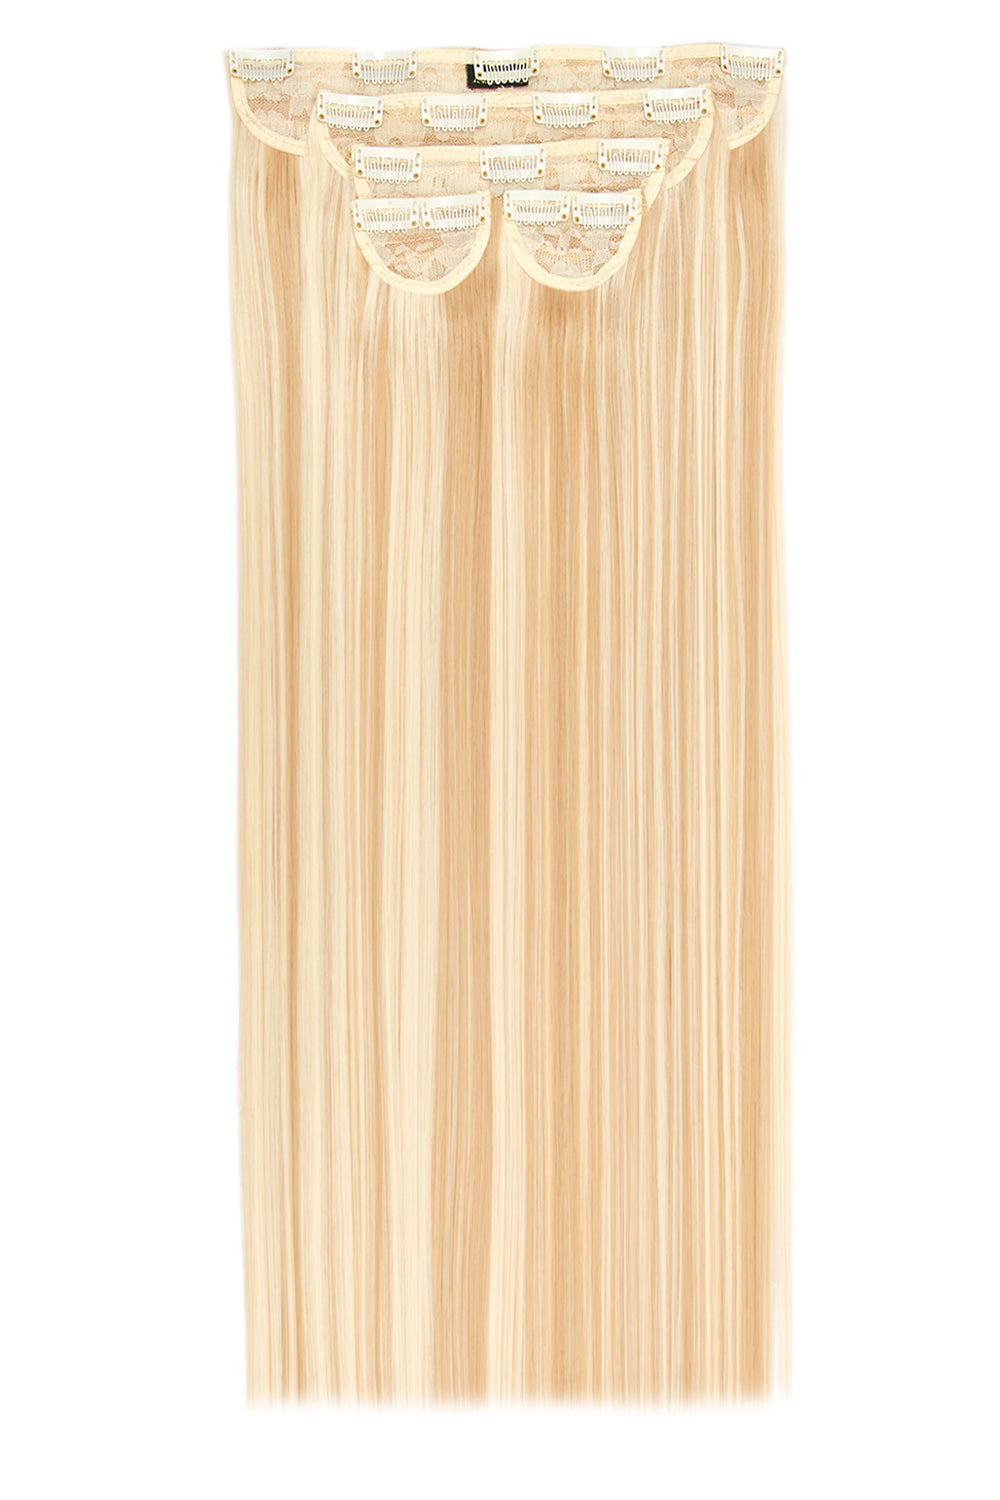 Super Thick 26" 5 Piece Statement Straight Clip In Hair Extensions - LullaBellz - Highlighted Champagne